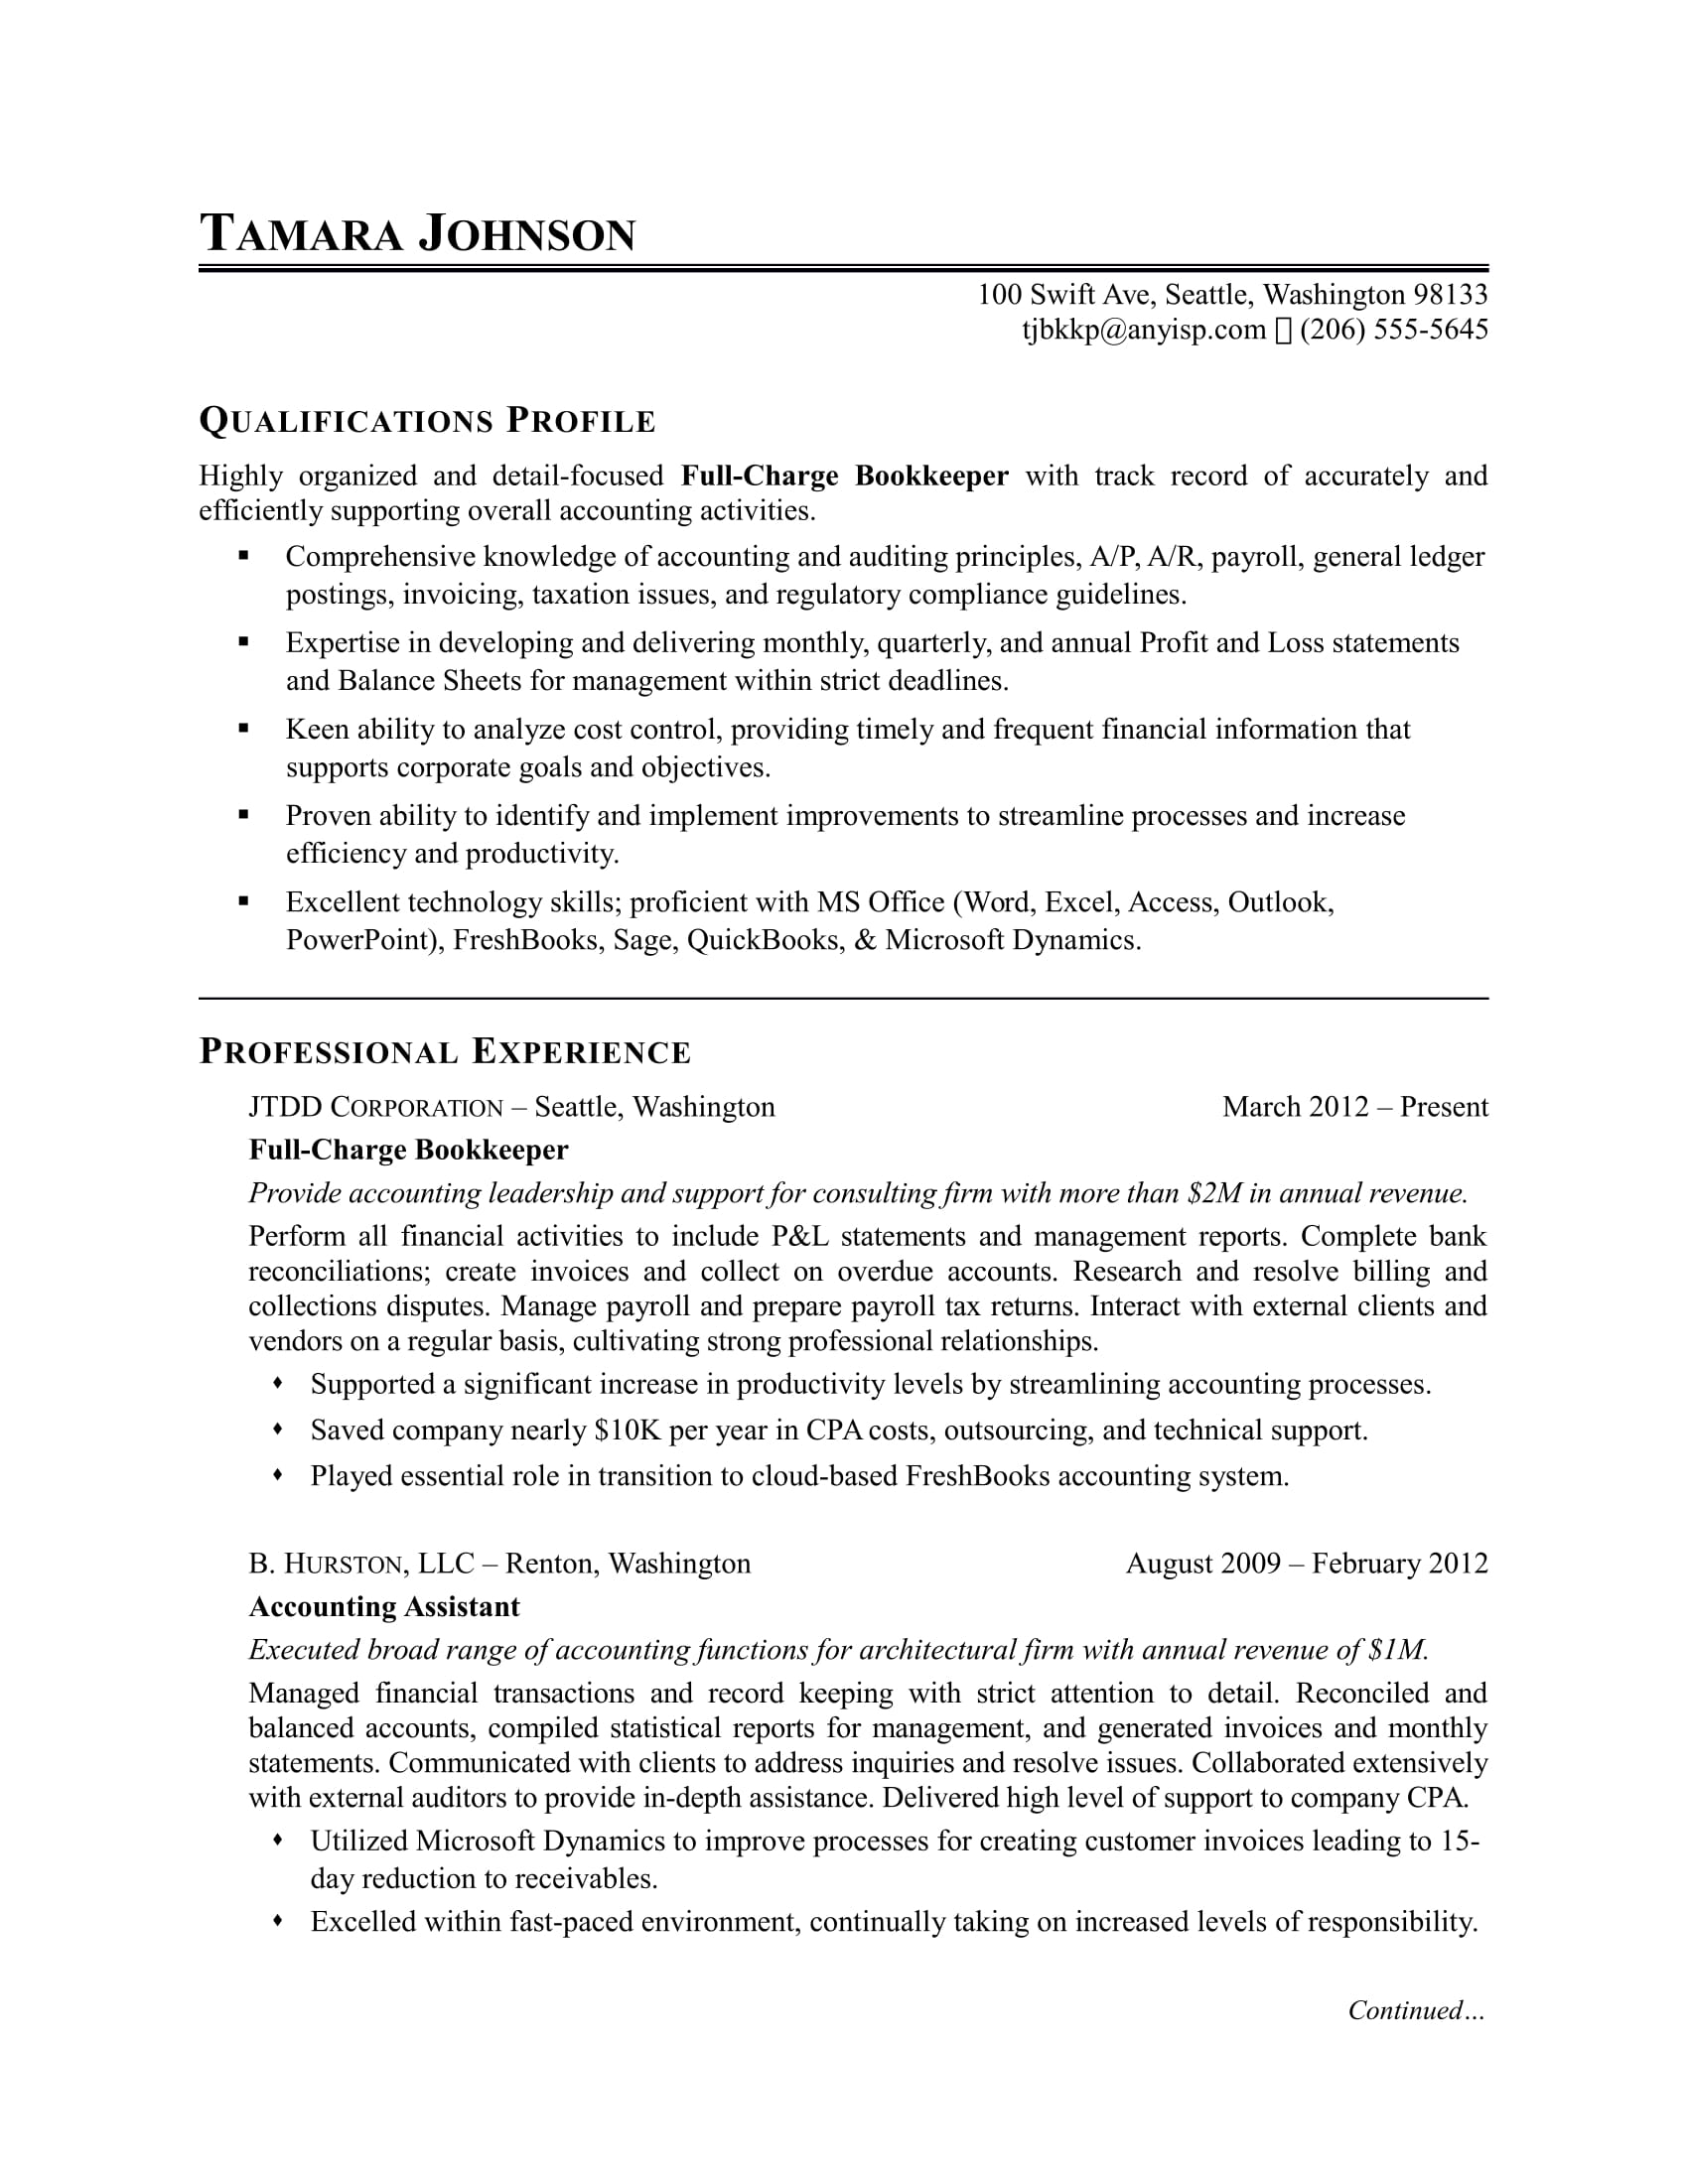 Example Of A Resume Bookkeeper example of a resume|wikiresume.com